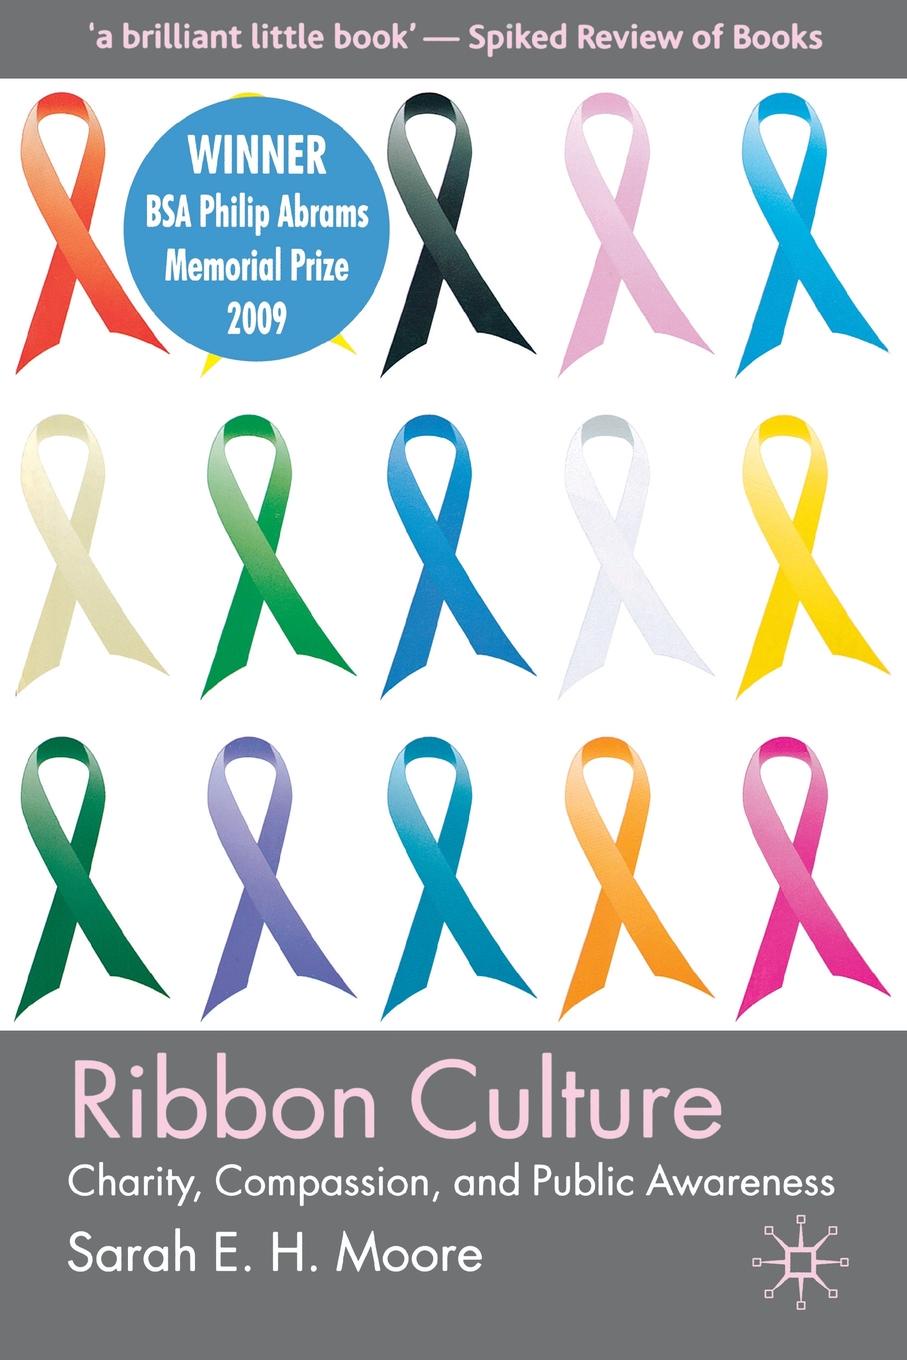 Ribbon Culture. Charity, Compassion and Public Awareness